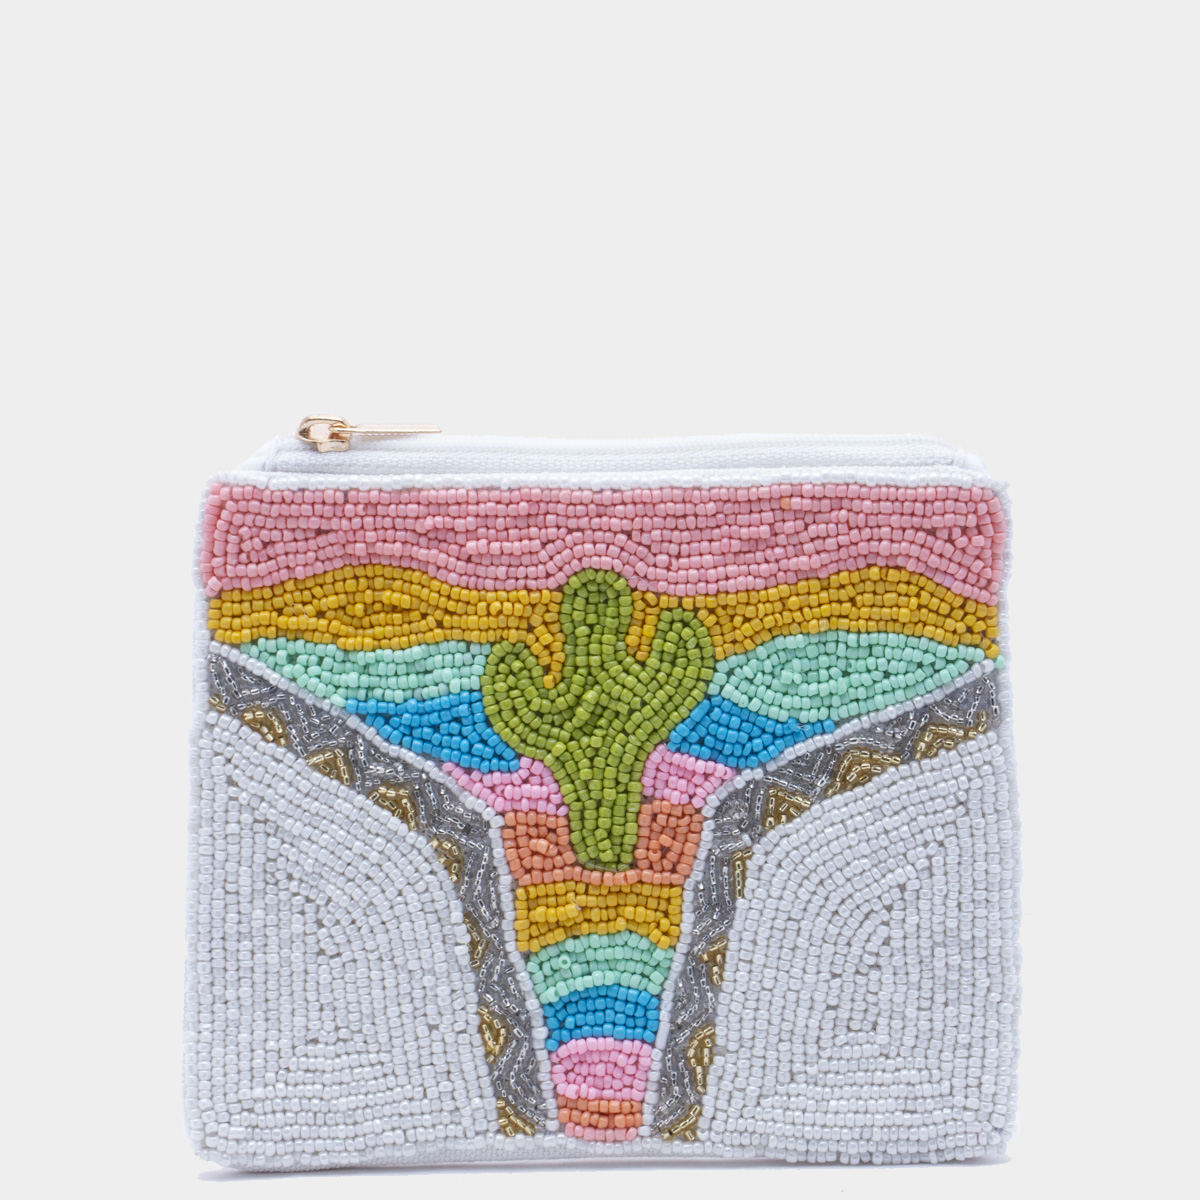 COLORFUL CACTUS SEED BEAD POUCH